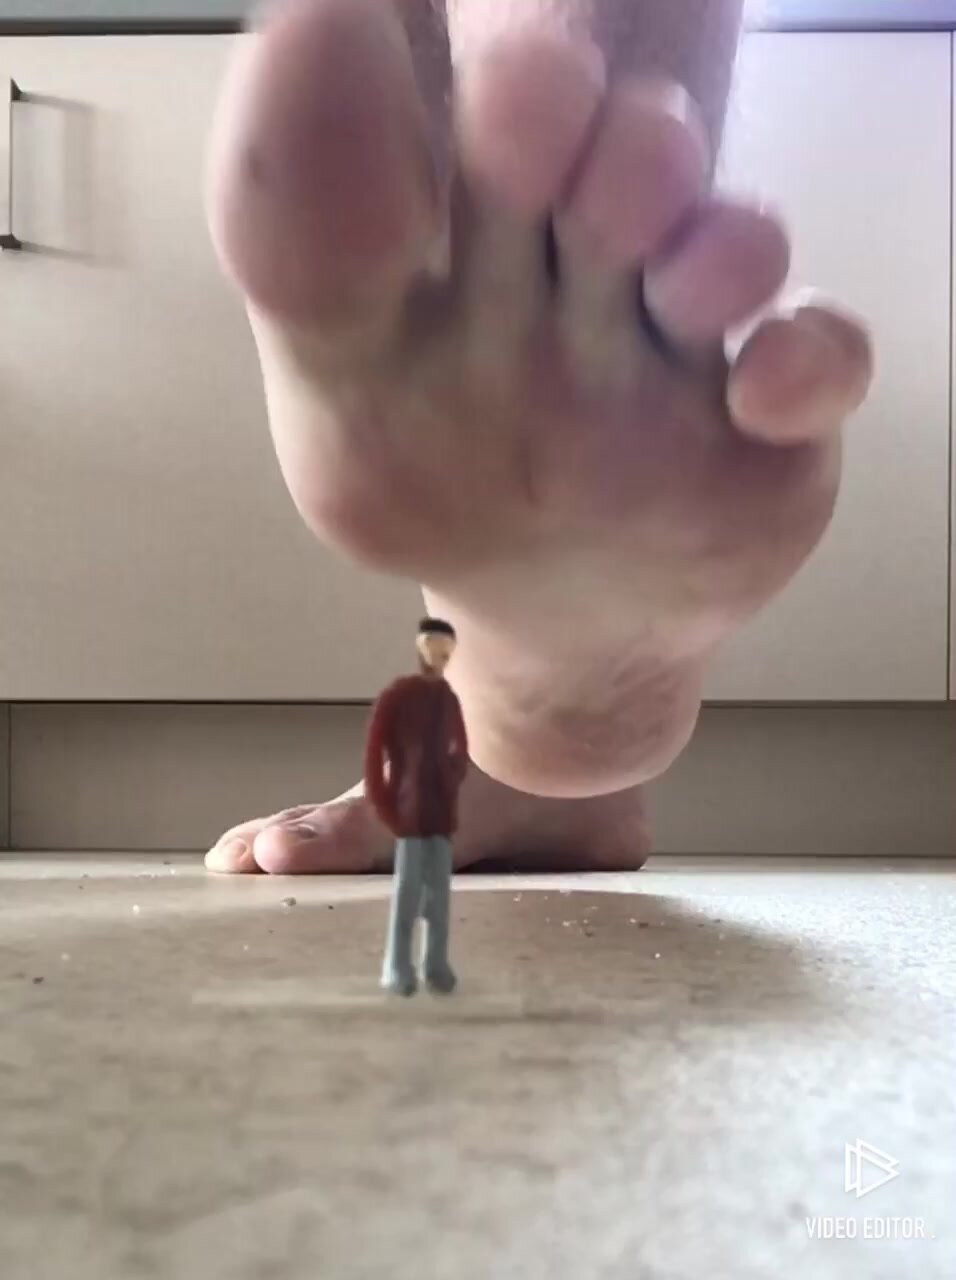 Stuck to giant foot